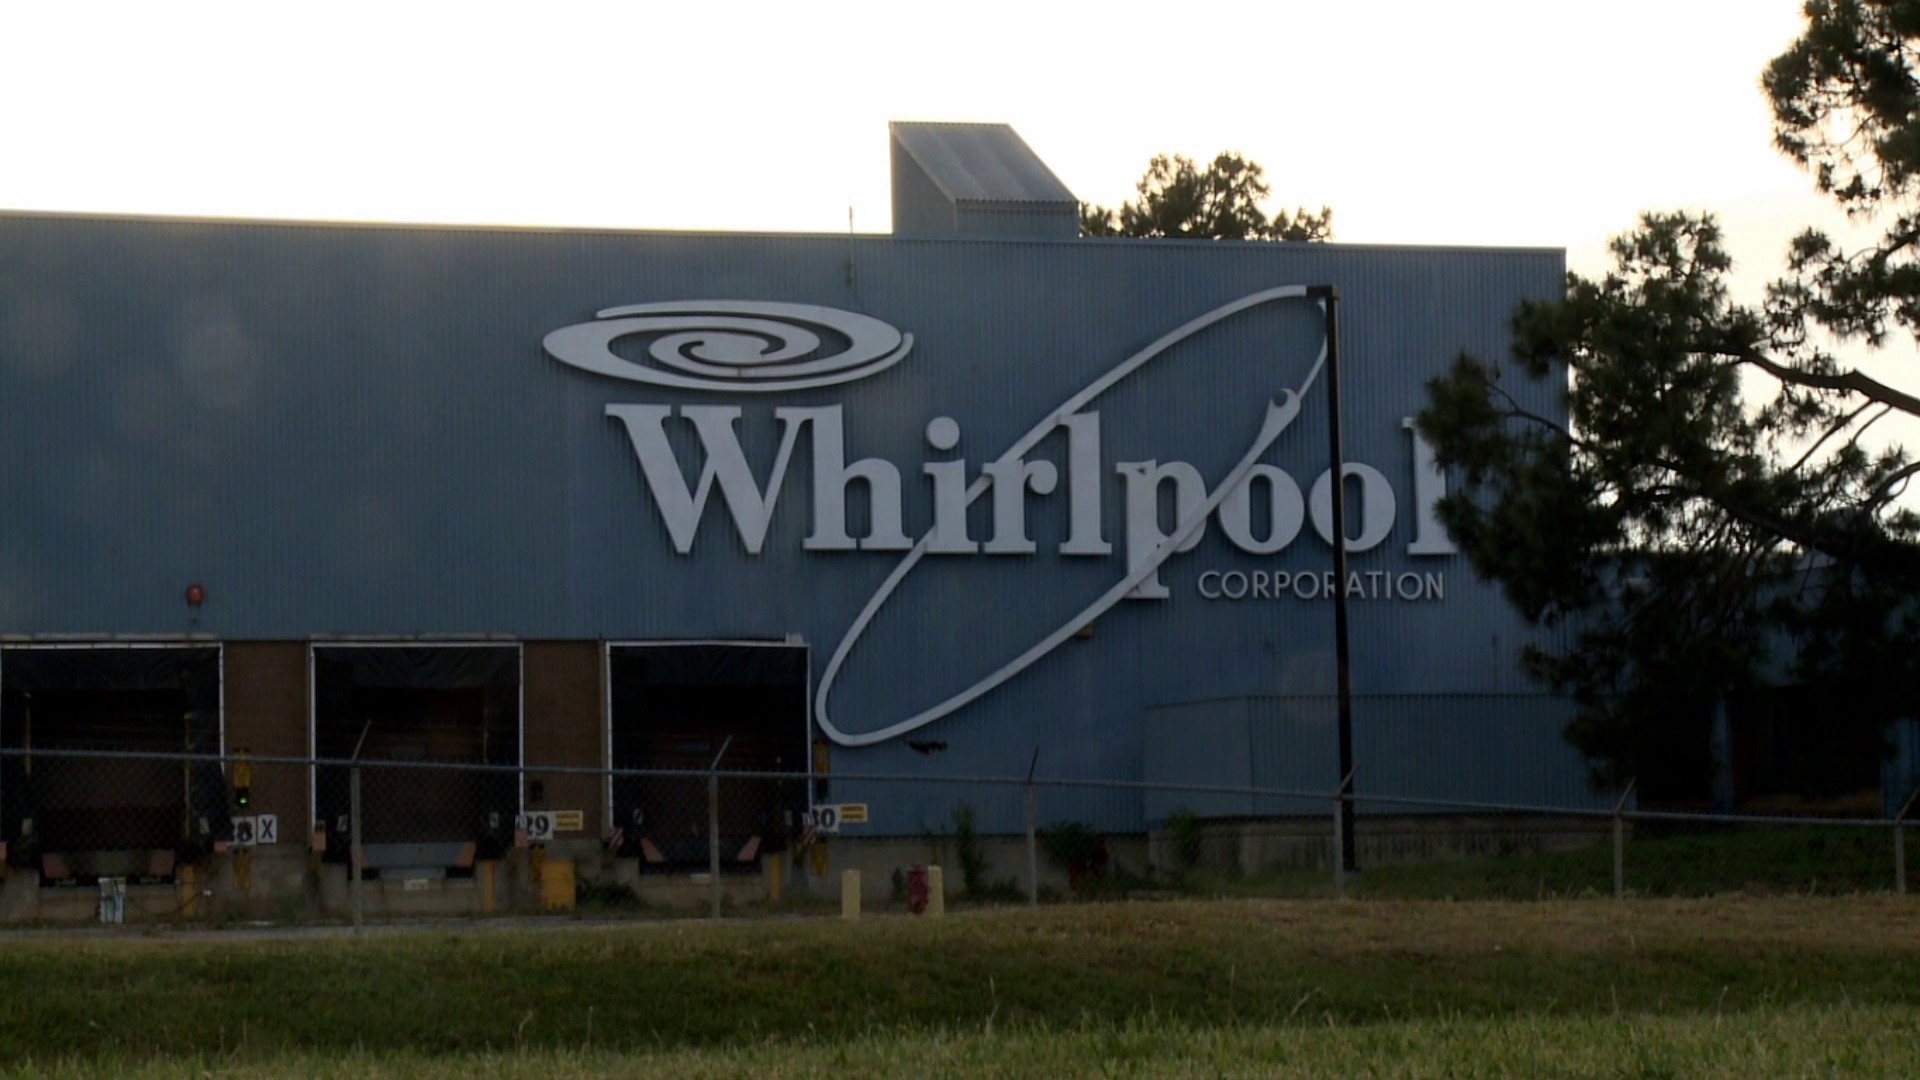 While its contamination is shrinking, there are still some hot spots with cancer-causing chemicals at the former Whirlpool plant in Fort Smith.